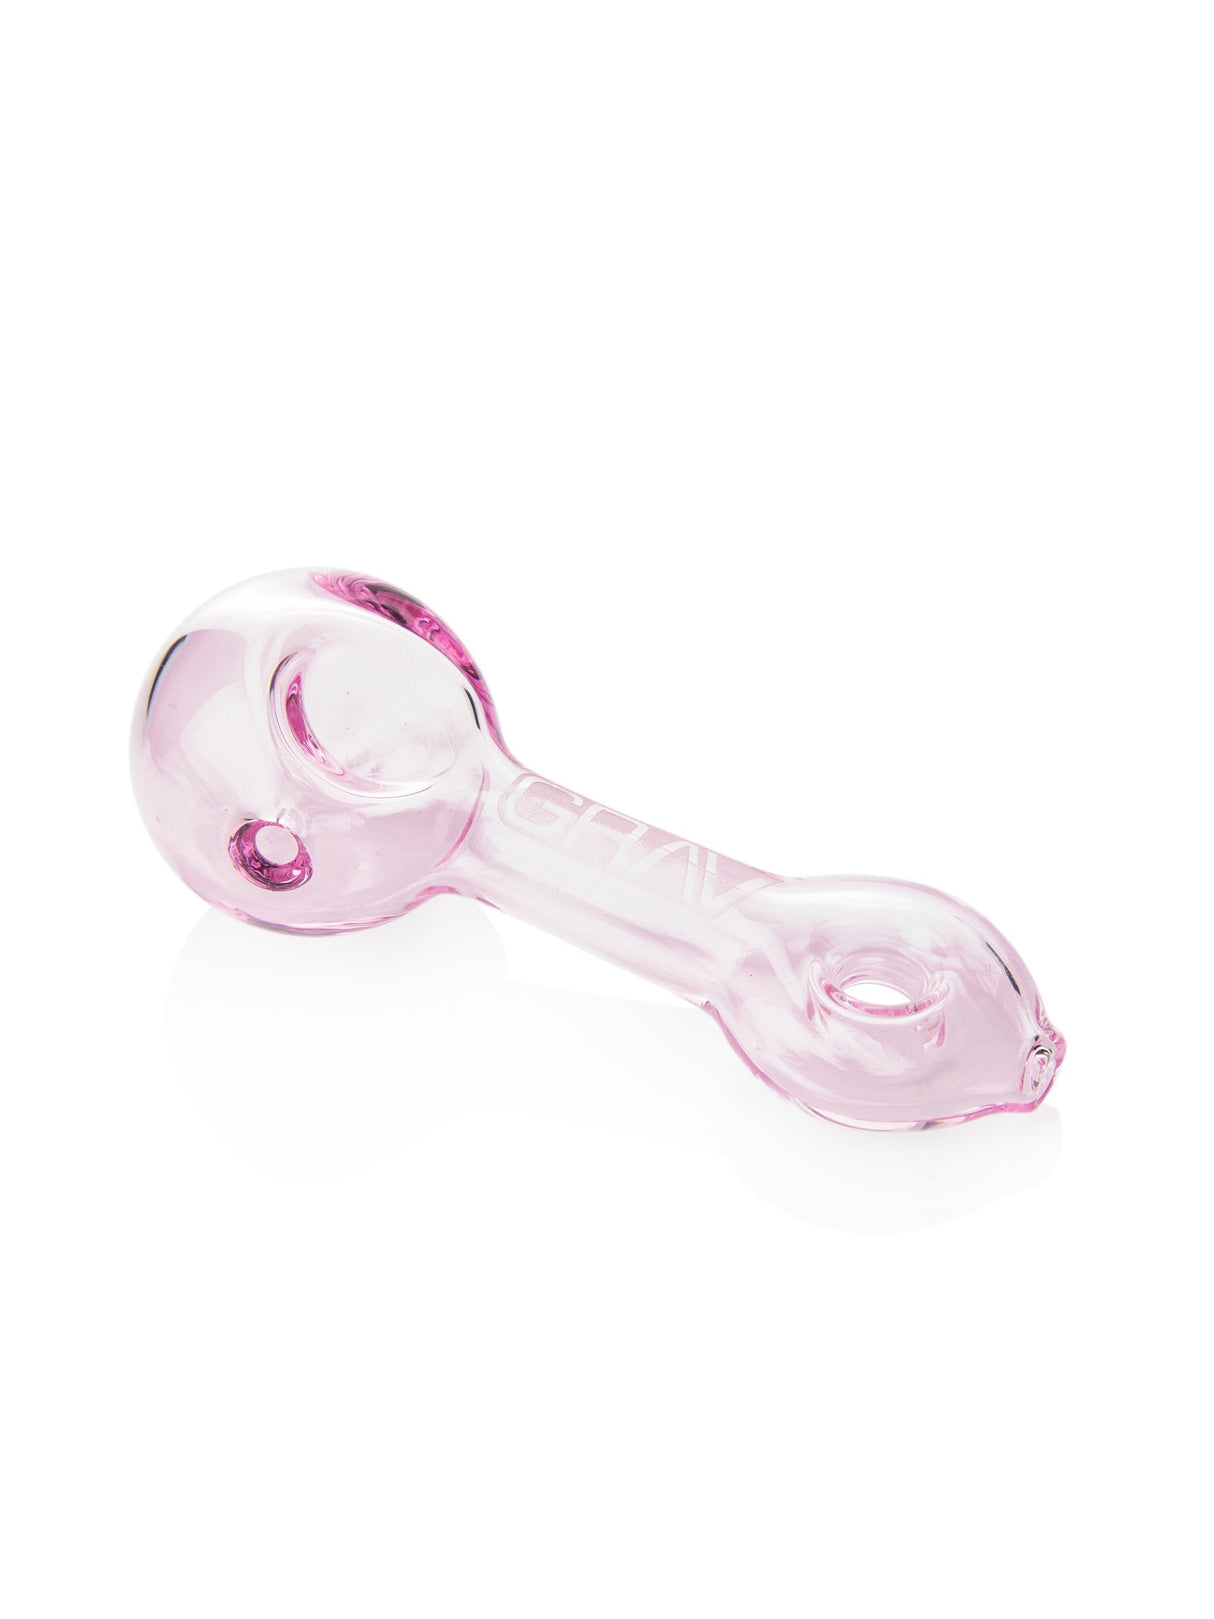 GRAV Mini Spoon Hand Pipe in Pink - Compact 3" Borosilicate Glass with Deep Bowl